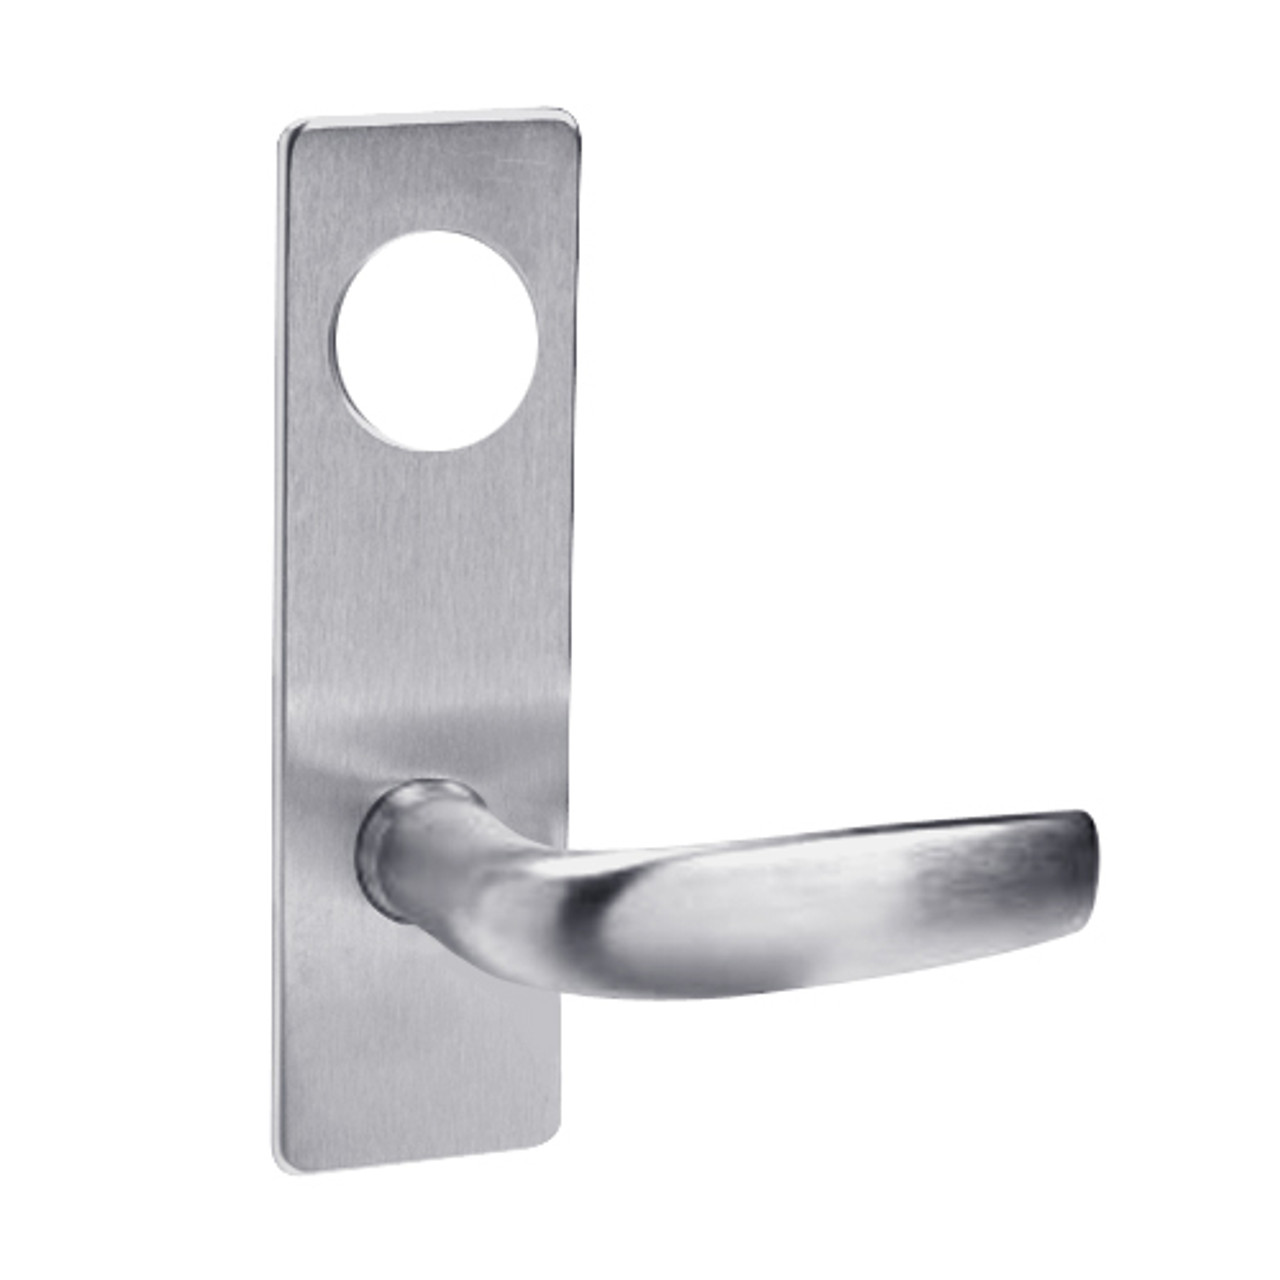 ML2057-CSN-626-CL6 Corbin Russwin ML2000 Series IC 6-Pin Less Core Mortise Storeroom Locksets with Citation Lever in Satin Chrome